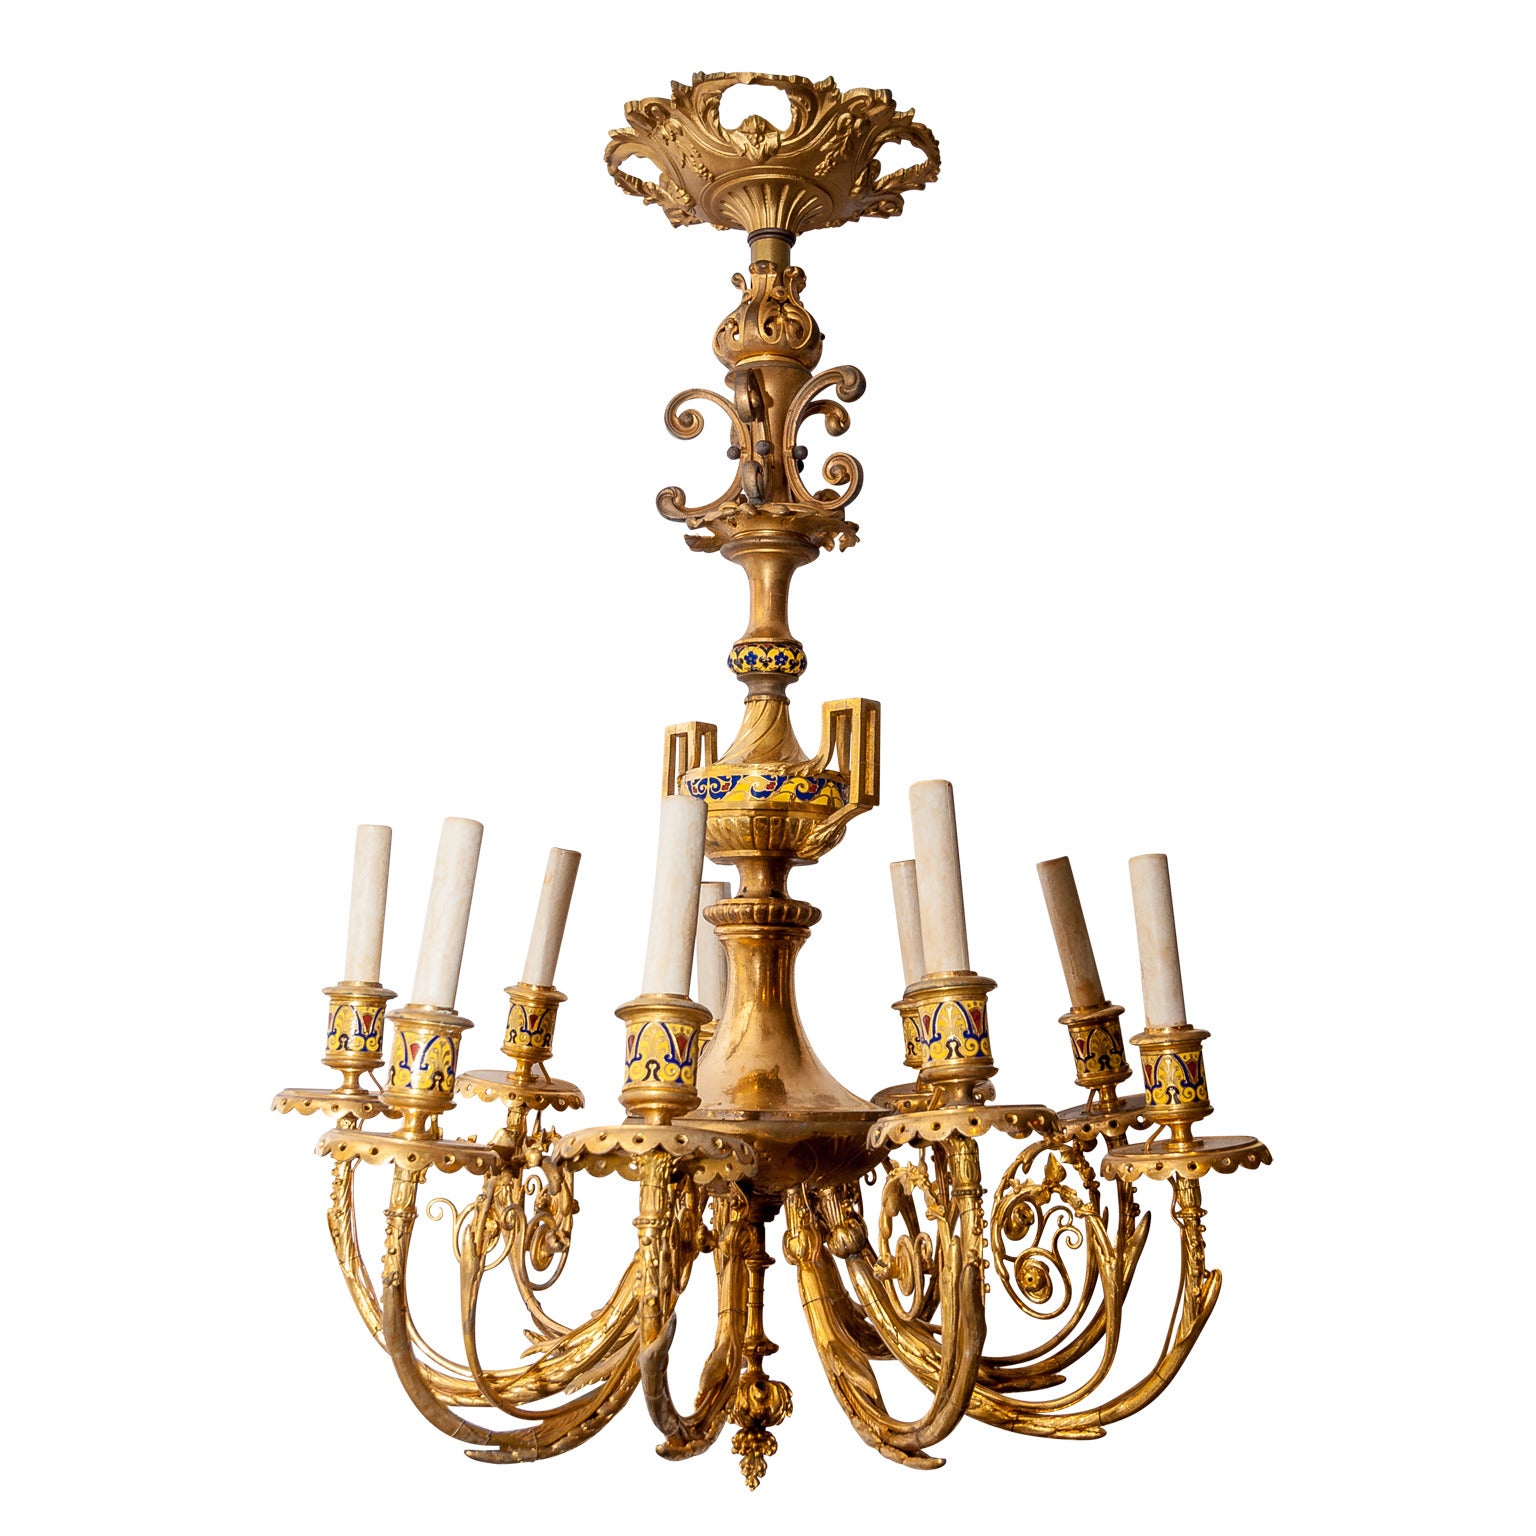 19th Century French Champleve Enamel and Bronze Nine-Light Chandelier For Sale